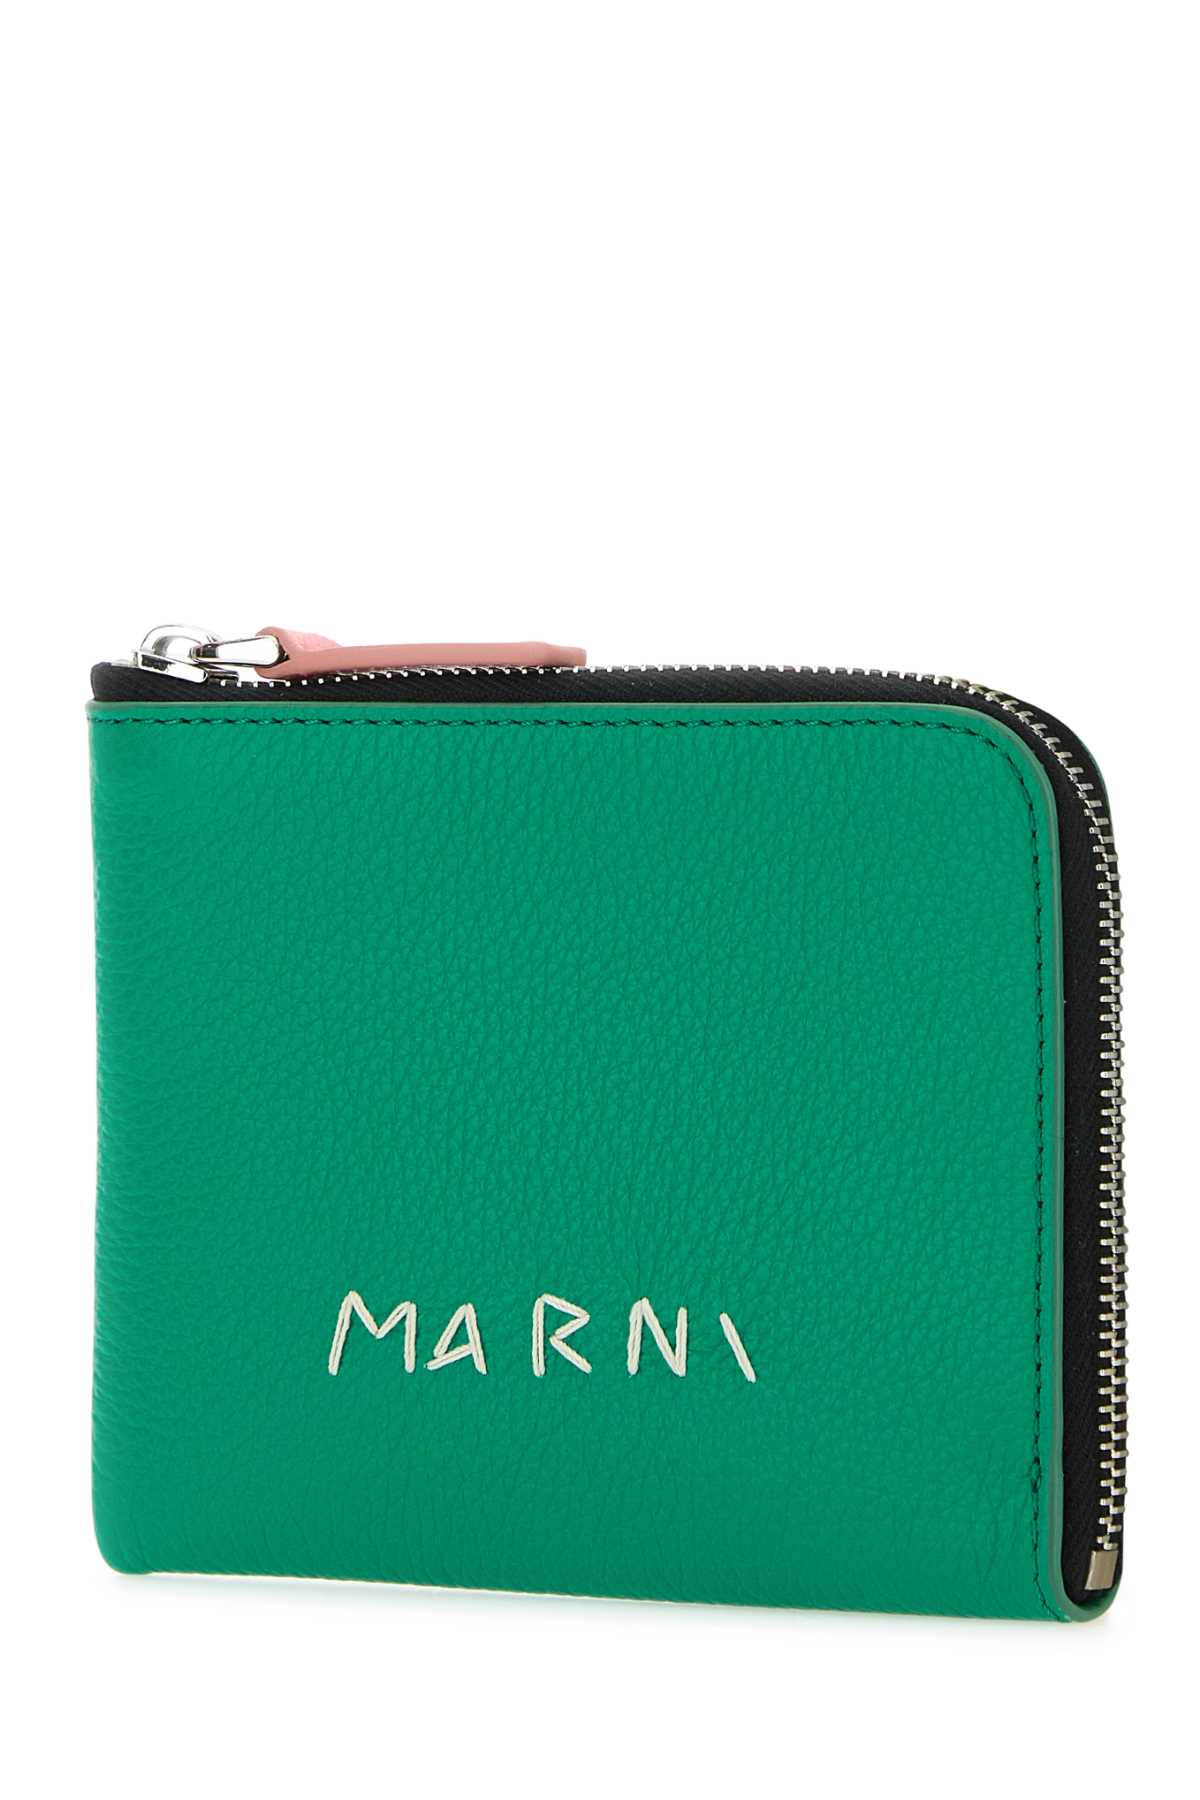 MARNI GREEN LEATHER WALLET